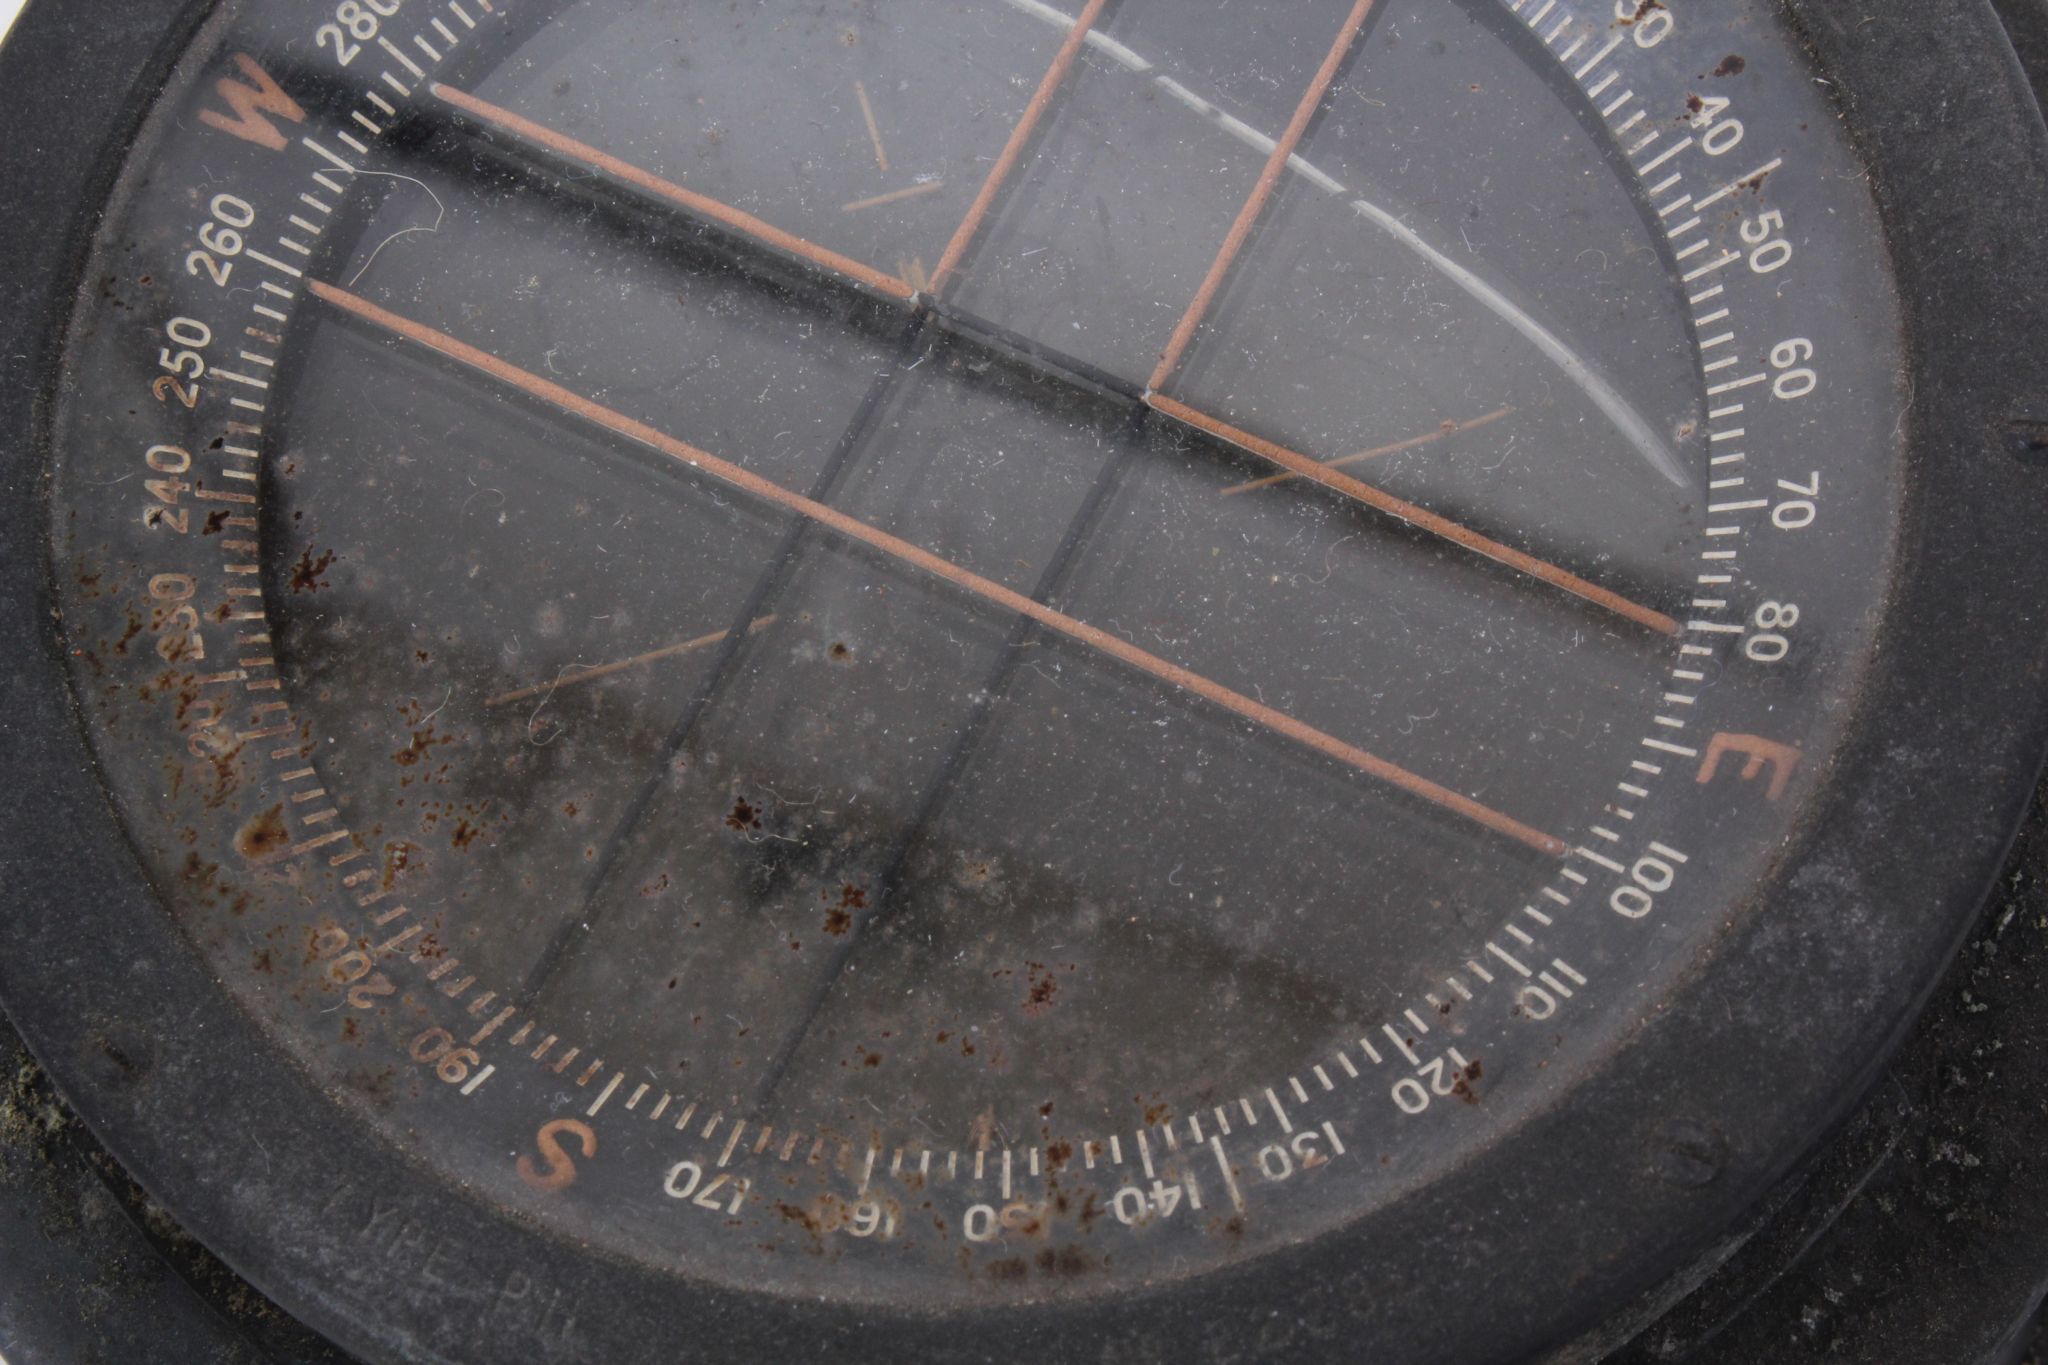 RAF WW2 aeroplane compass, type P11 as used in Spitfire and Hurricane planes, aperture approx. 9.2cm - Image 7 of 7